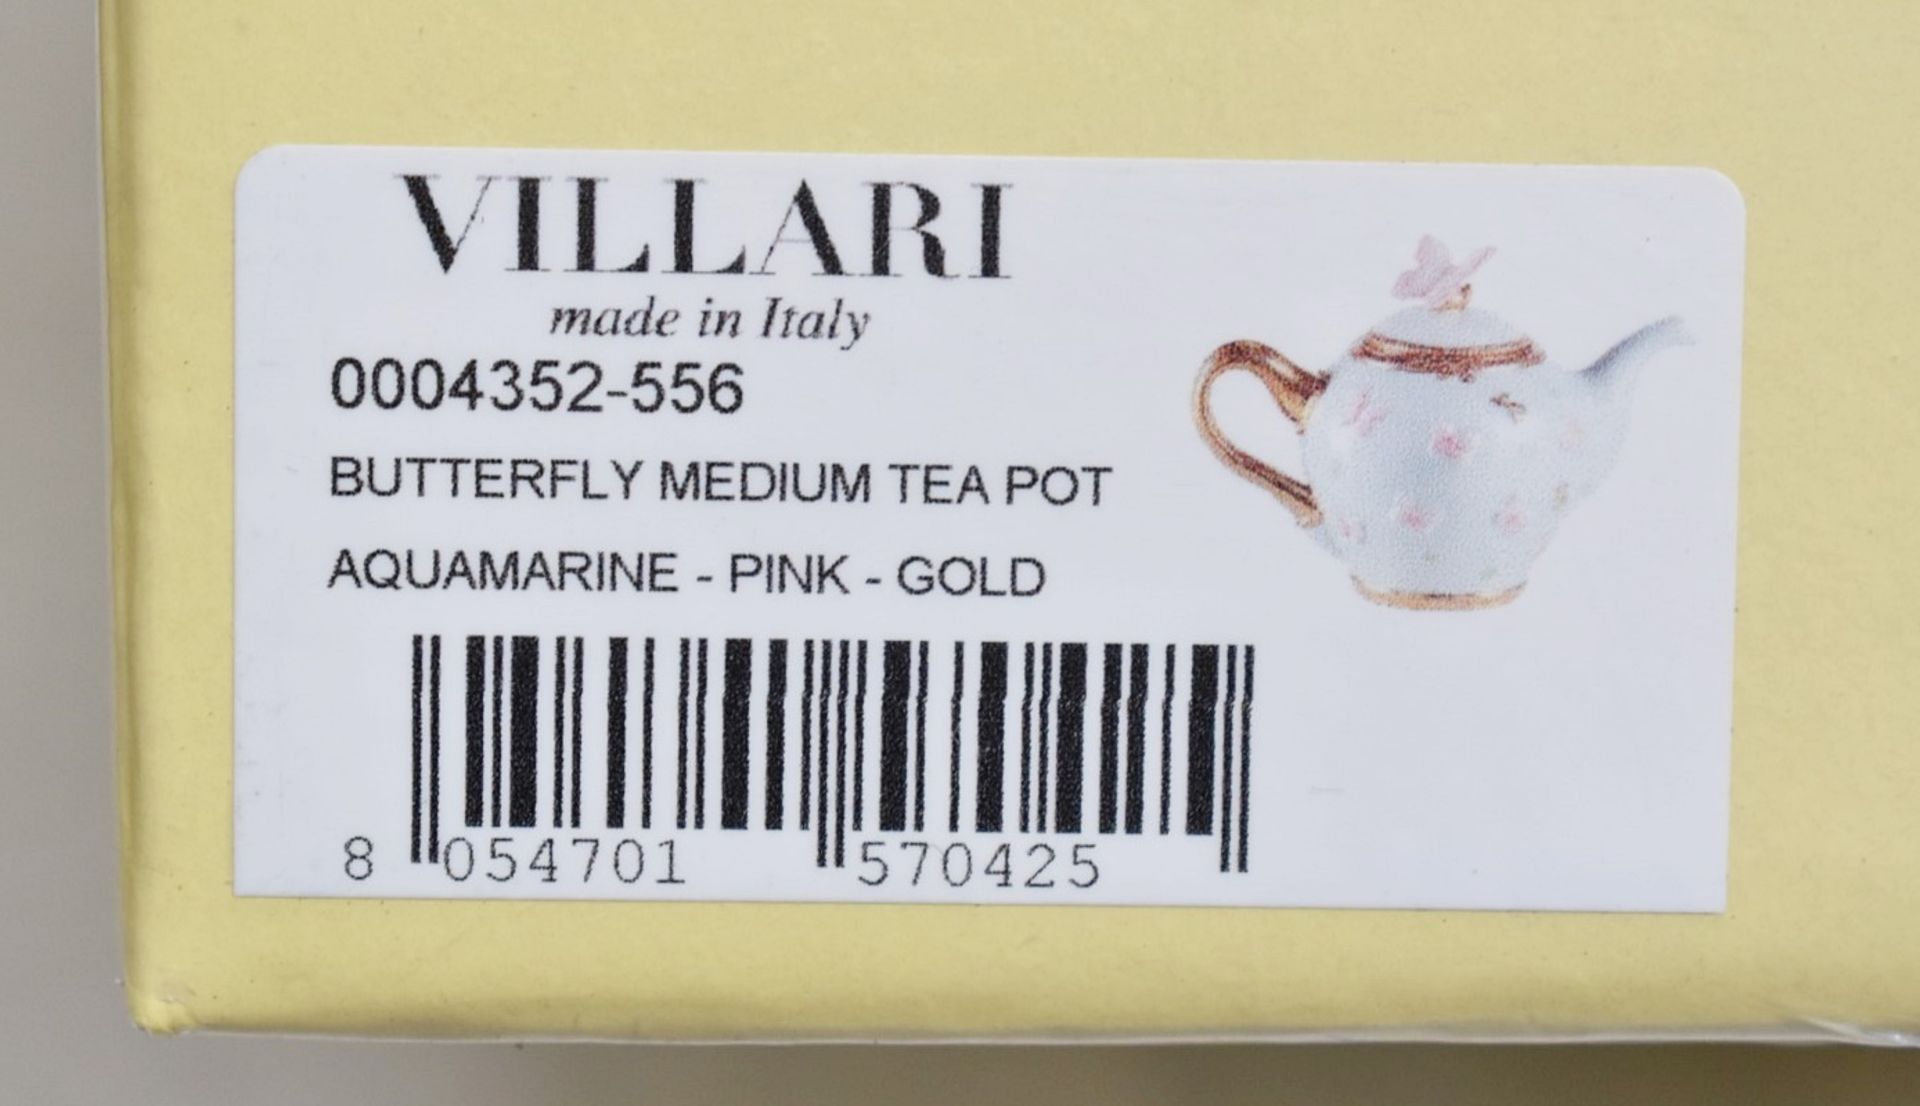 1 x VILLARI Hand-crafted Luxury Italian Porcelain Butterfly Tea Pot - Sealed/Boxed - RRP £365.00 - Image 2 of 4